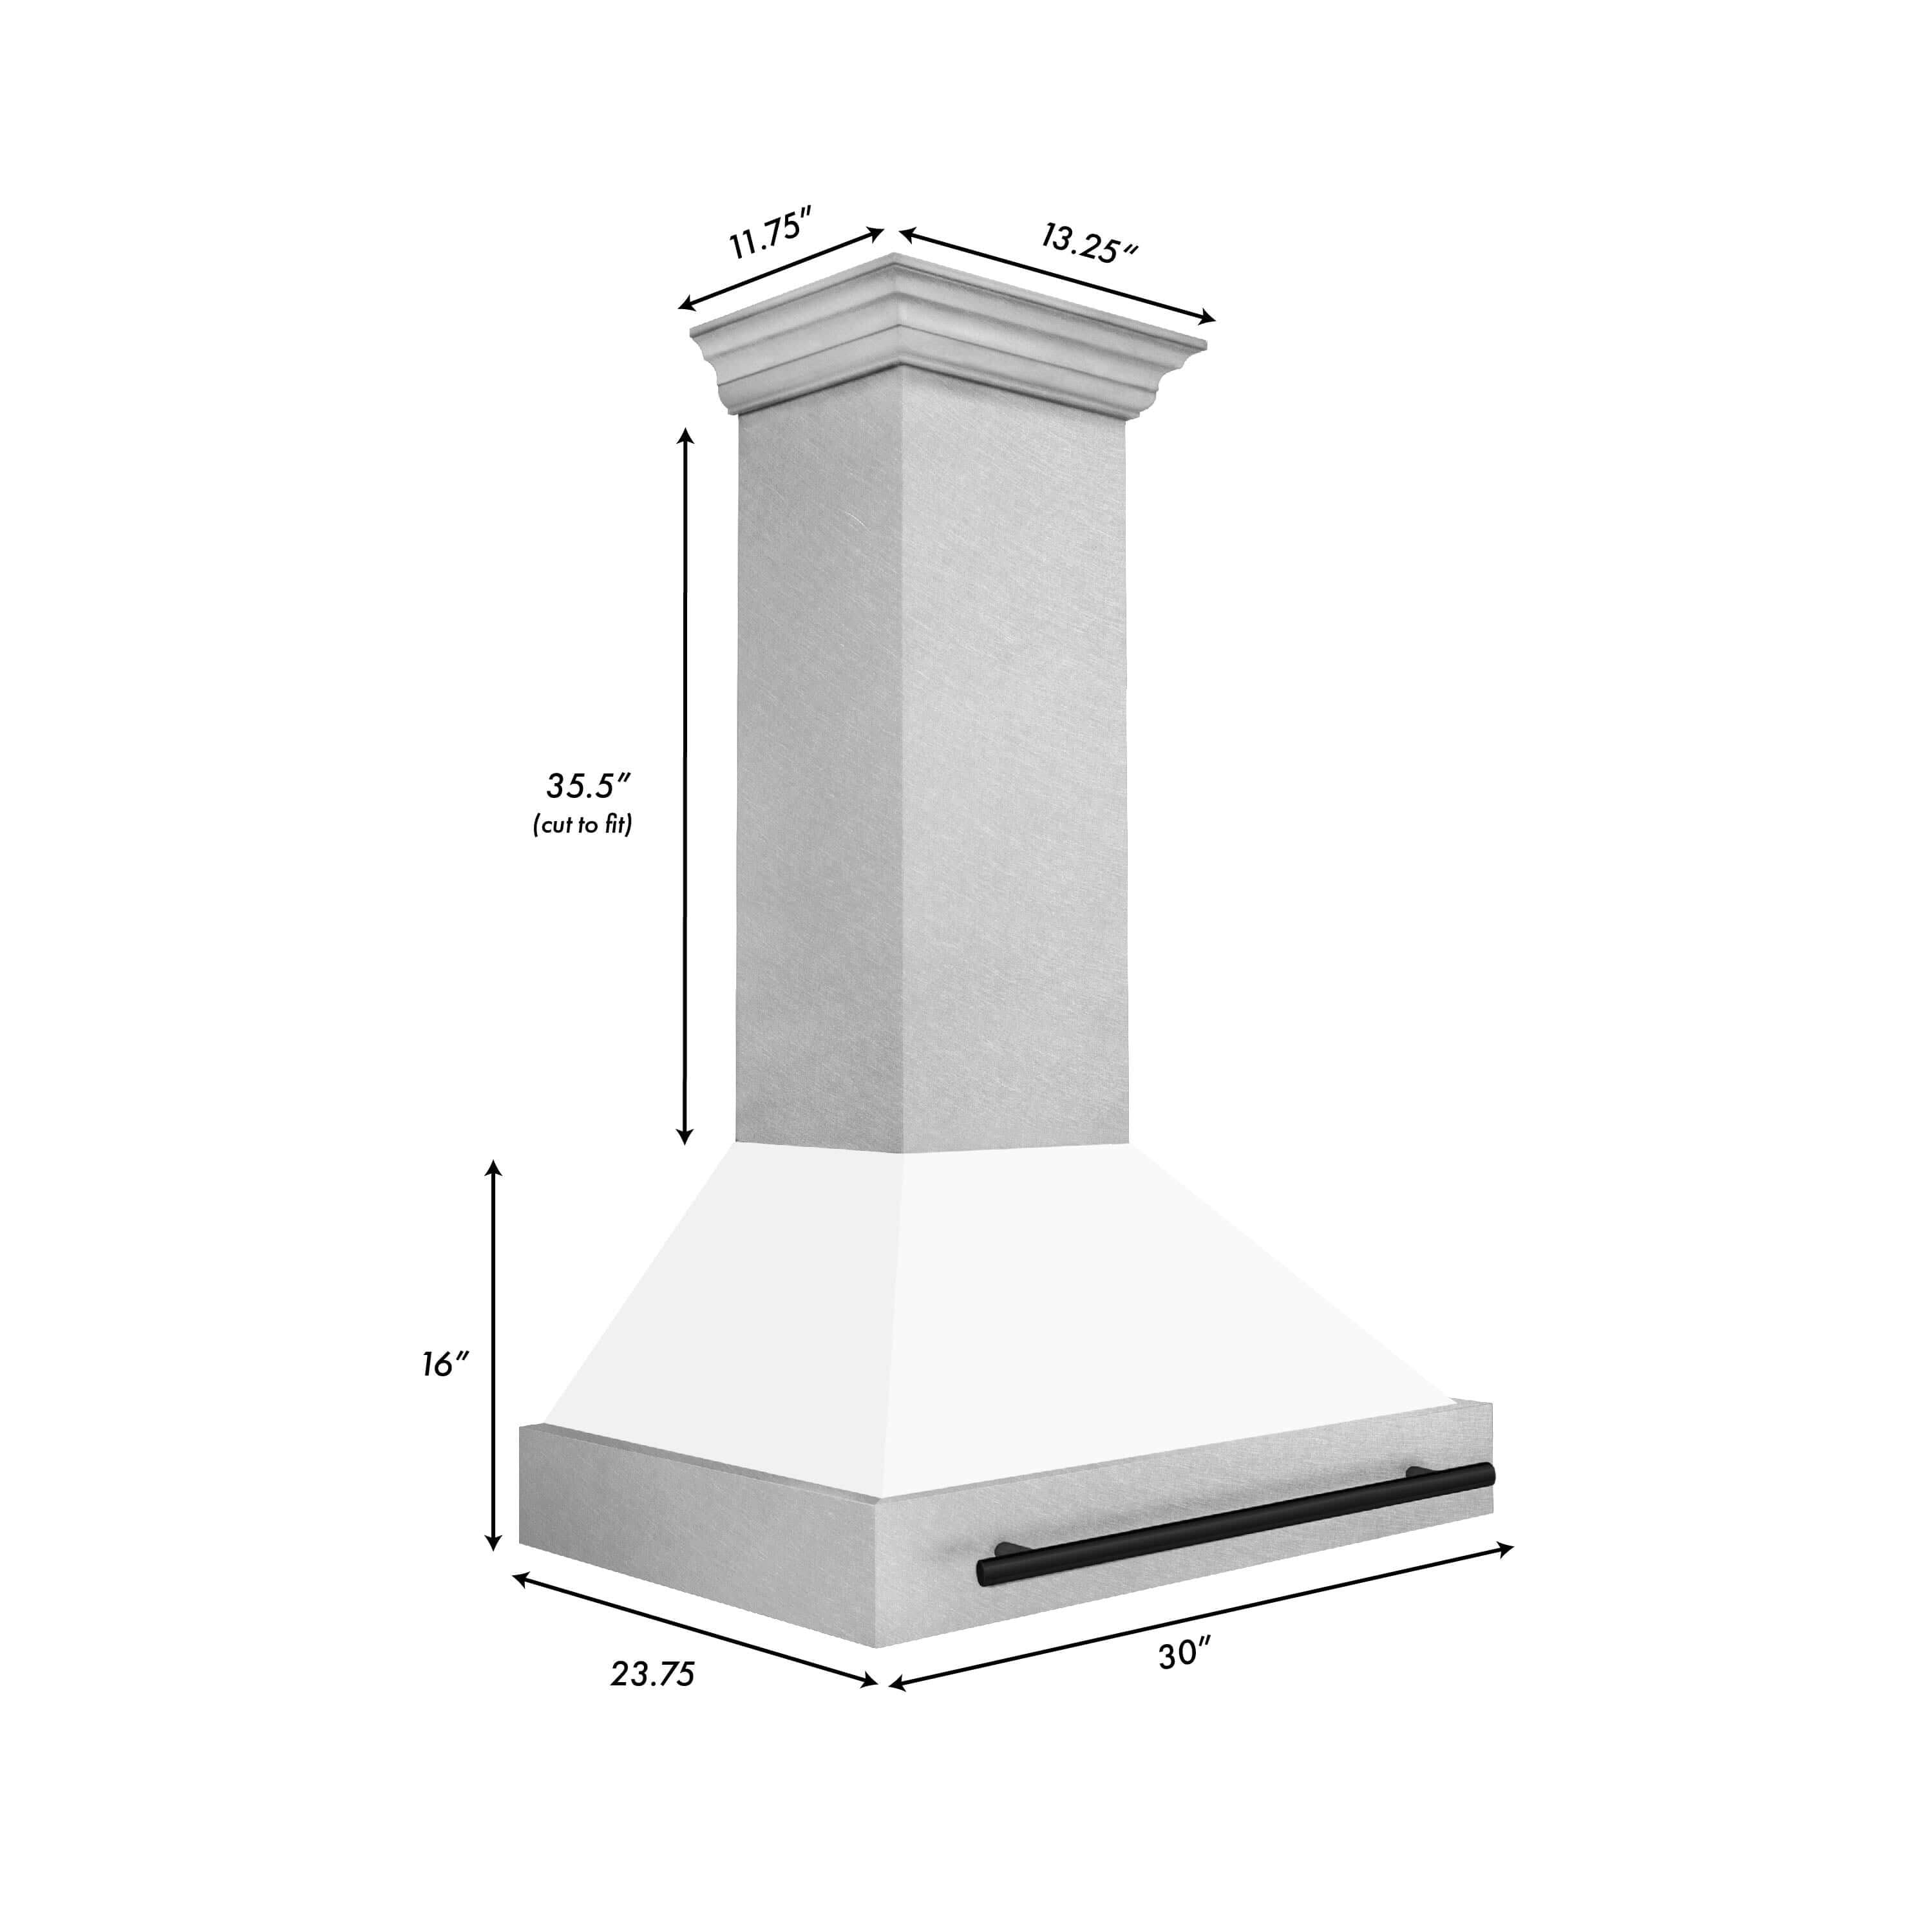 ZLINE Autograph Edition 36 in. Fingerprint Resistant Stainless Steel Range Hood with White Matte Shell and Accented Handle (8654SNZ-WM36) dimensional diagram and measurements.